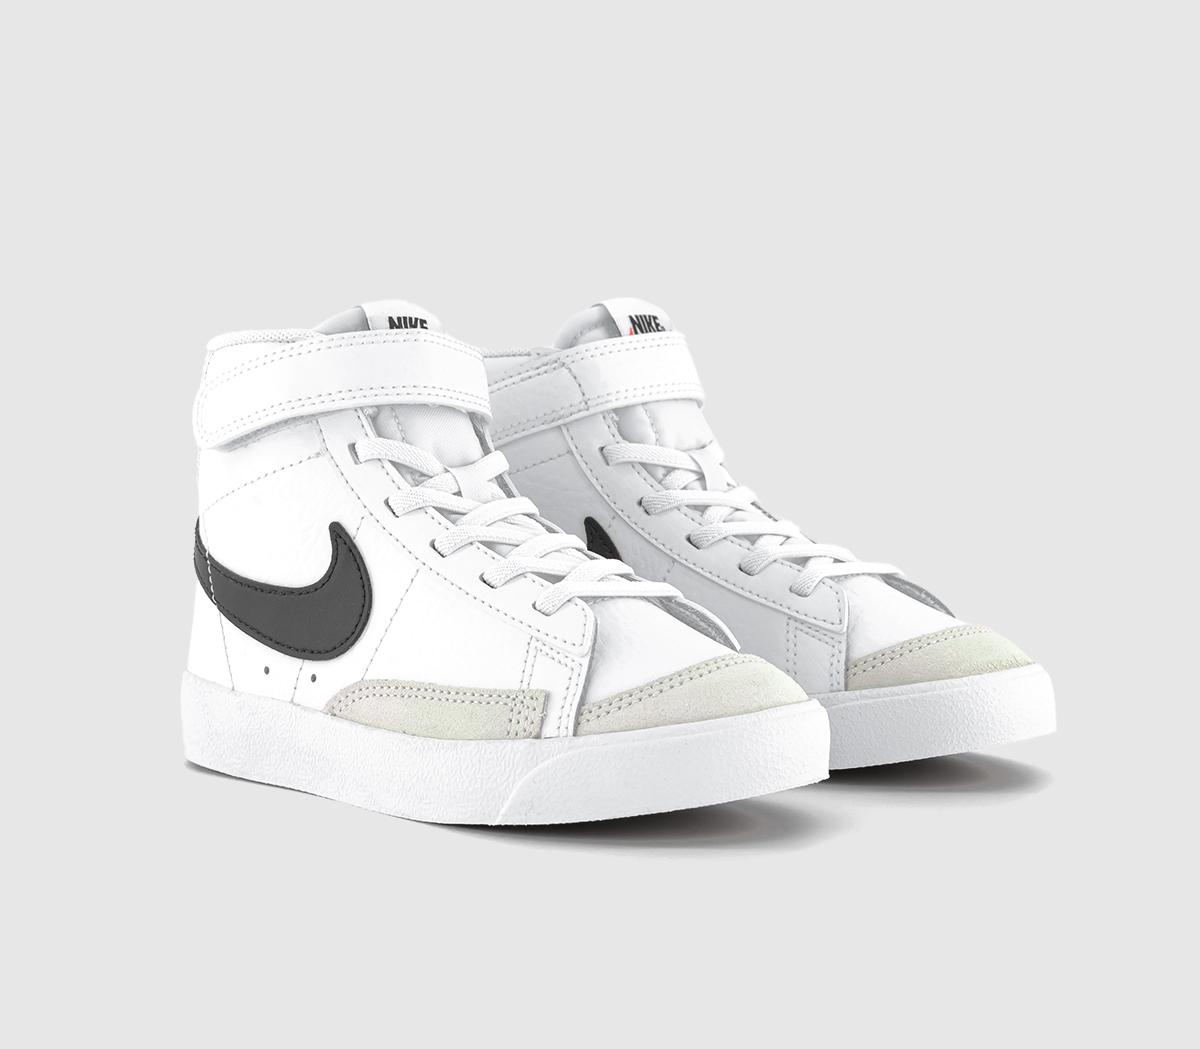 Nike Blazer Mid 77 Kids White And Black Leather Trainers, Size: 10 Youth